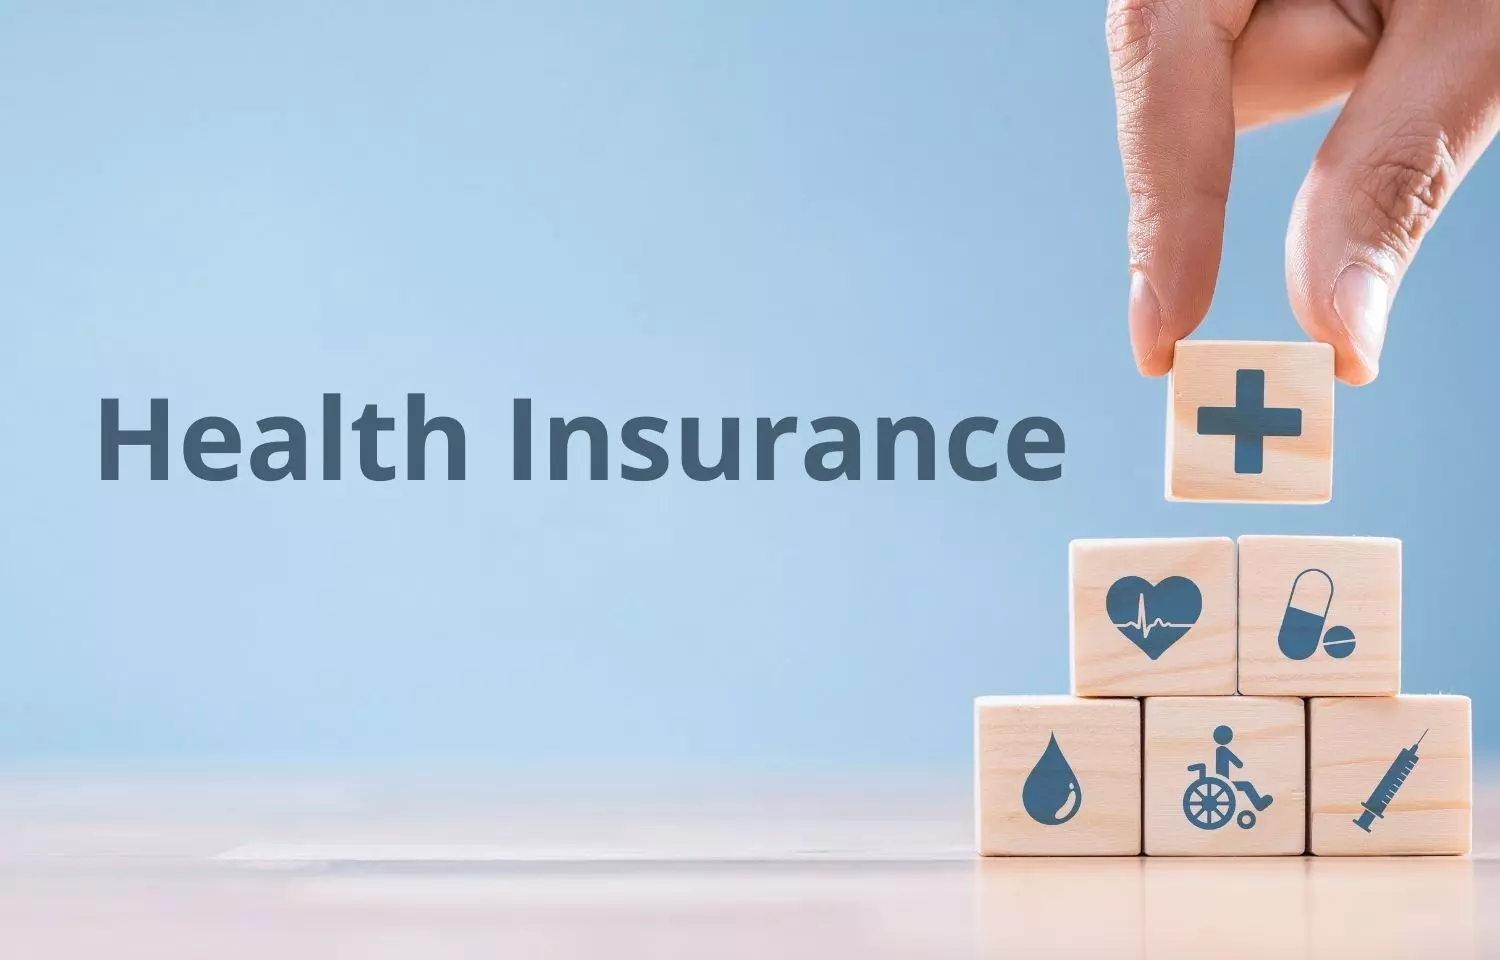 9 Things No One Tells You About Buying Health Insurance